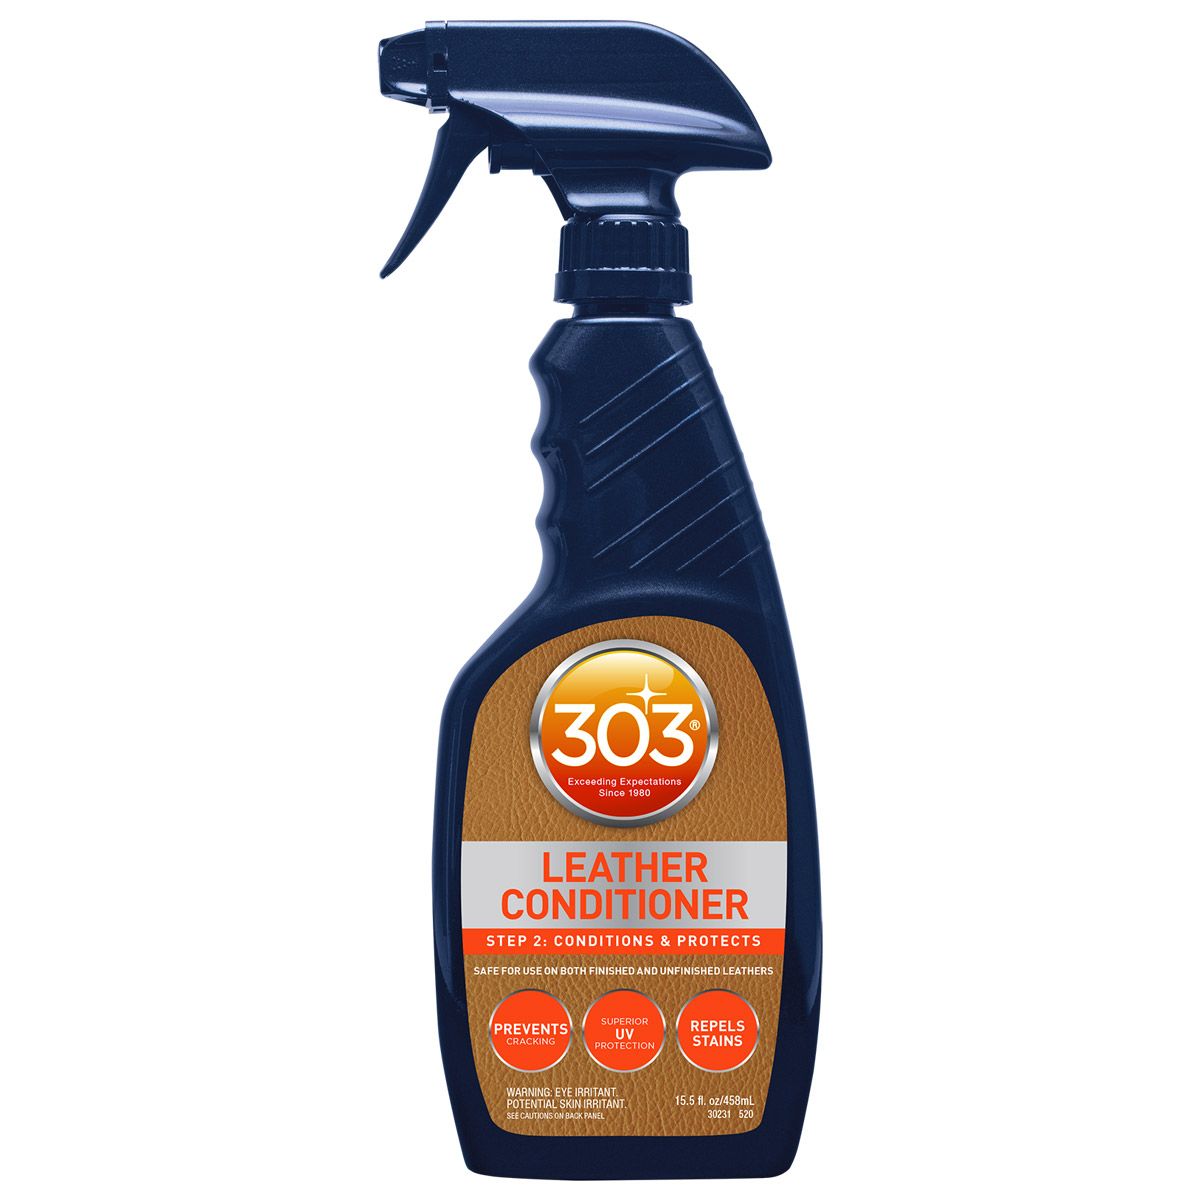 image for 303 Leather Conditioner – 16oz